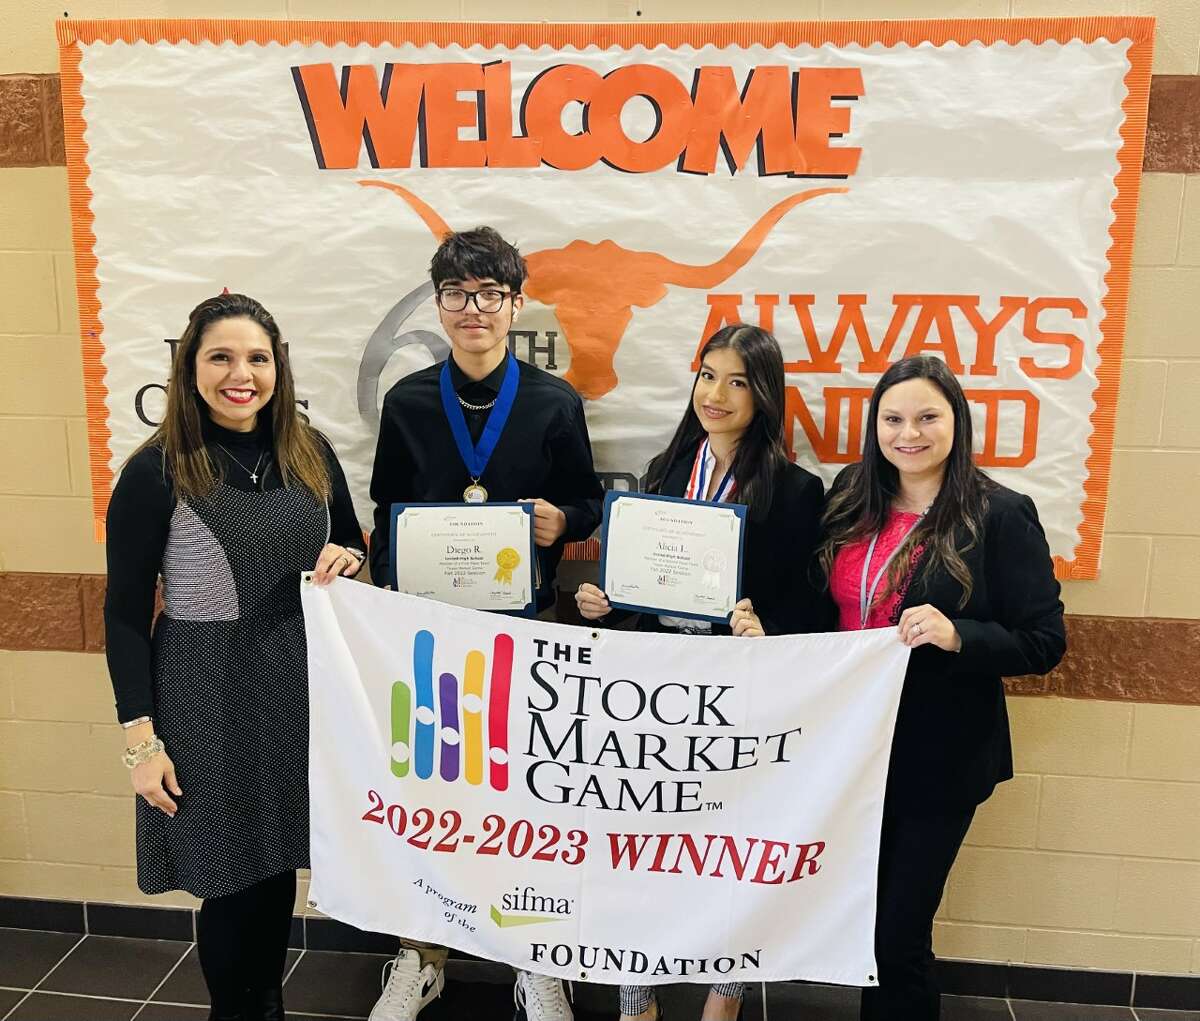 United students Diego Ramirez and Alicia Lopez won the Stock Market Game in the Rio Grande area this past fall. 